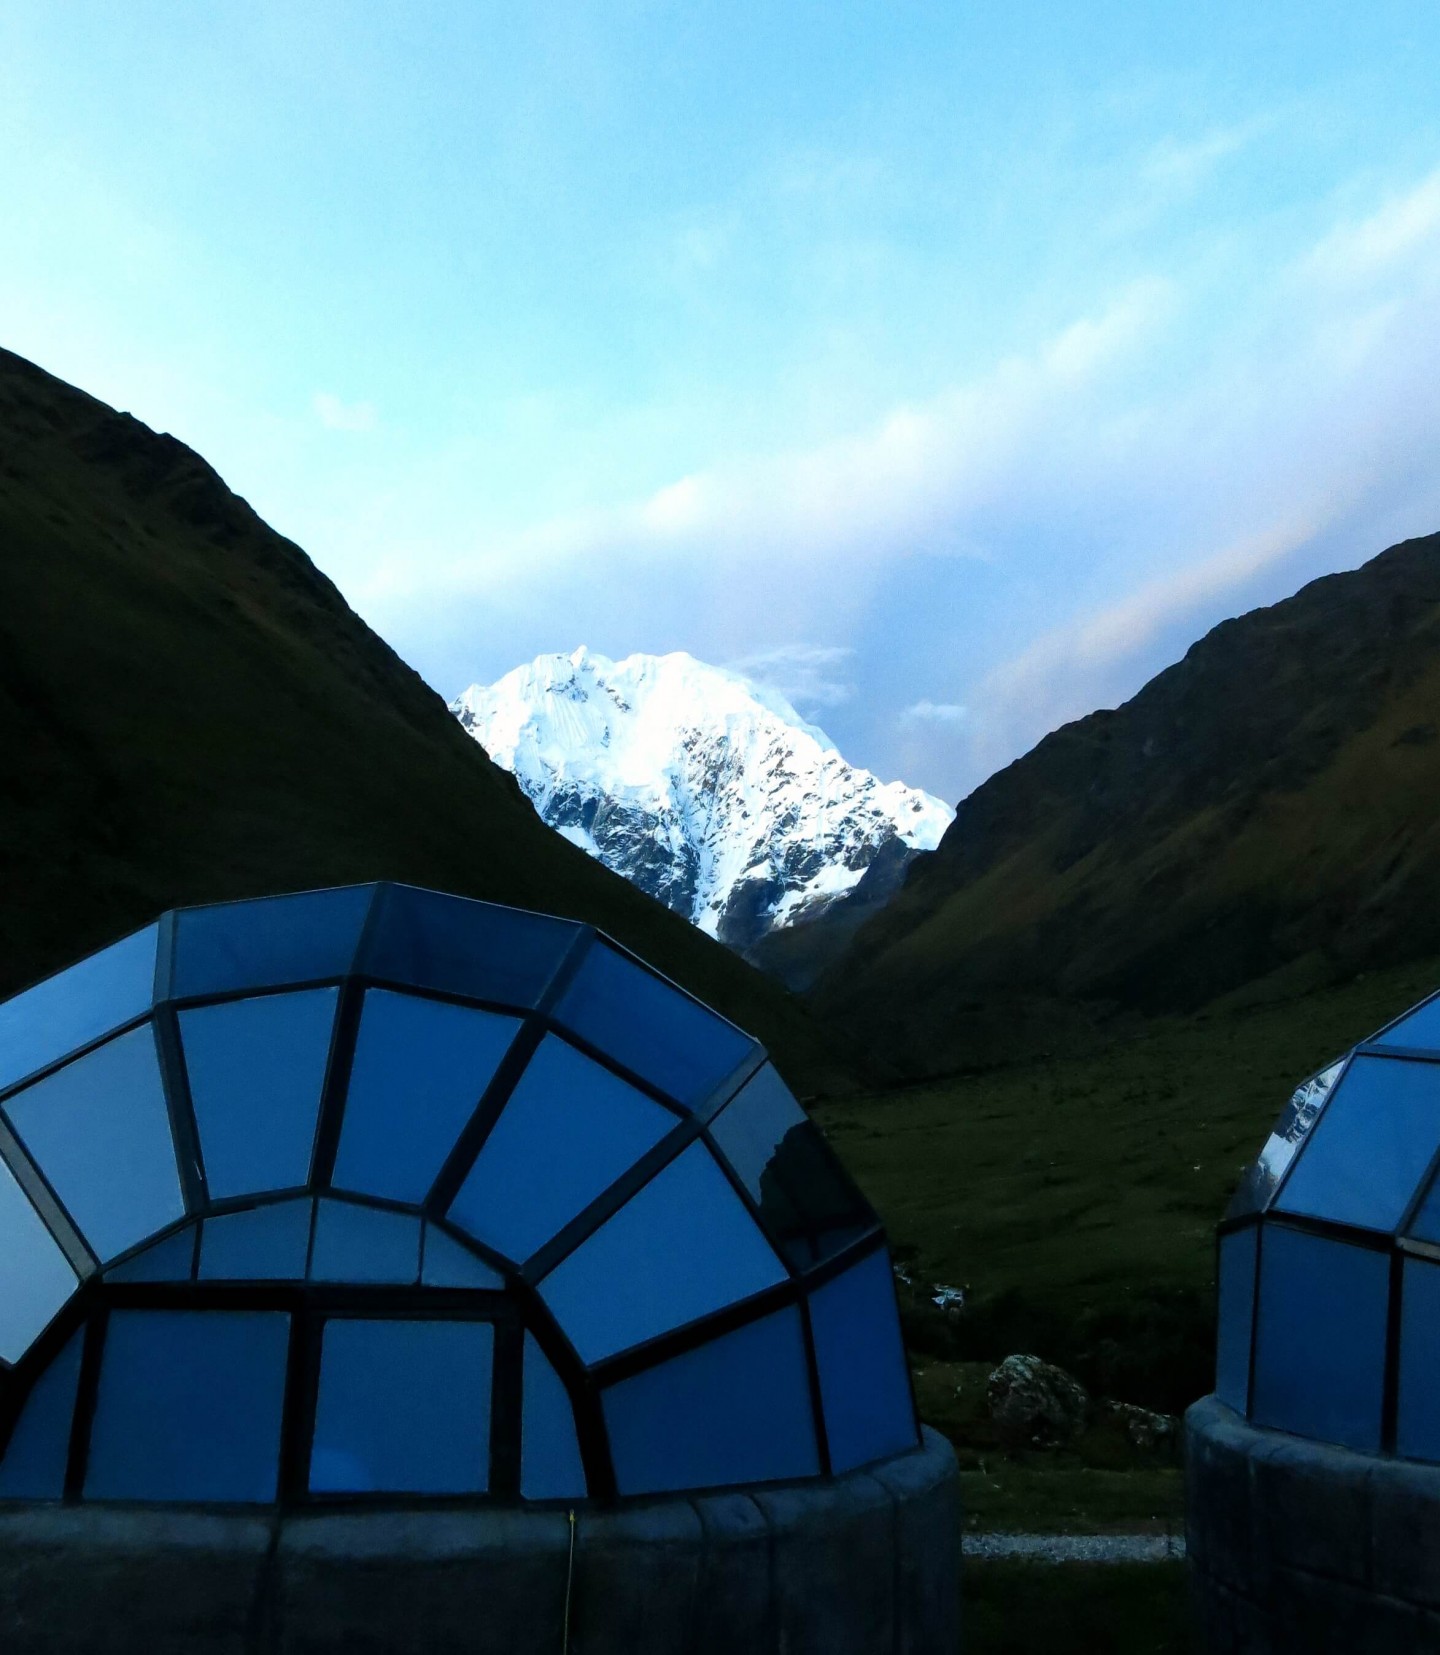 Our igloos for the night at the base of Salkantay mountain. The first night of our 4 day trek to Machu Picchu, Peru.